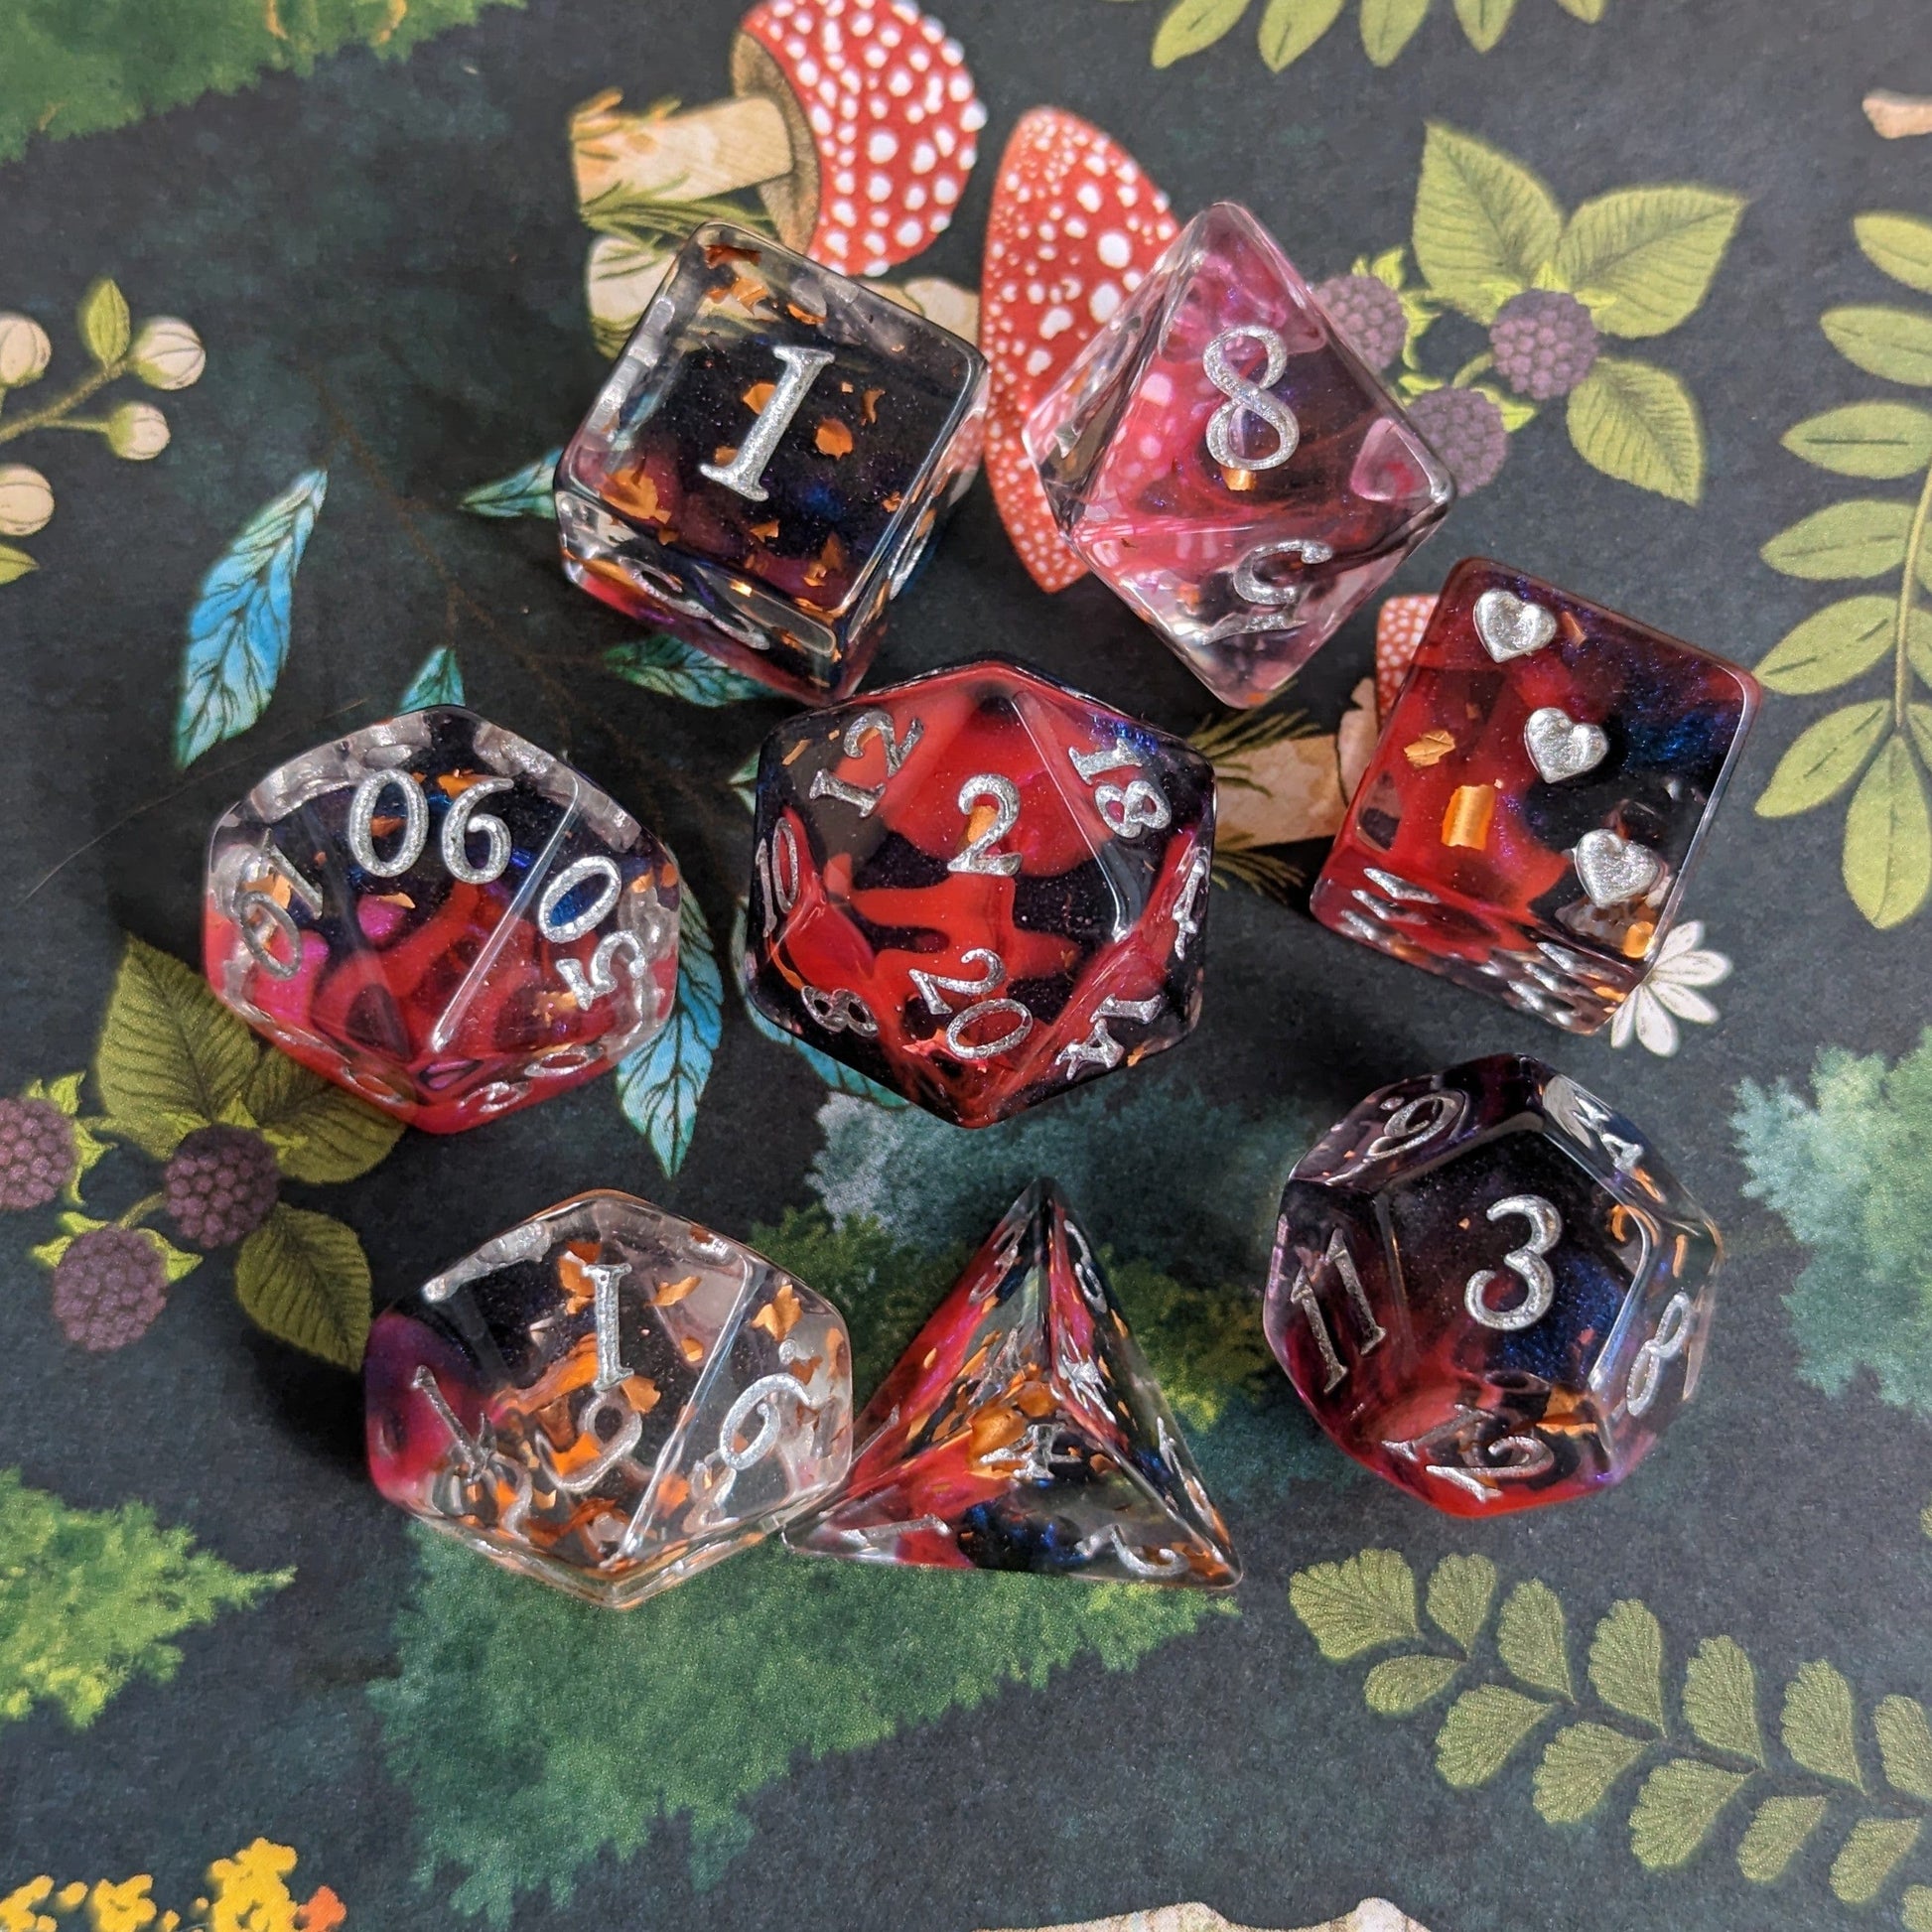 Heart Piercer 12 and 8 piece DND dice sets